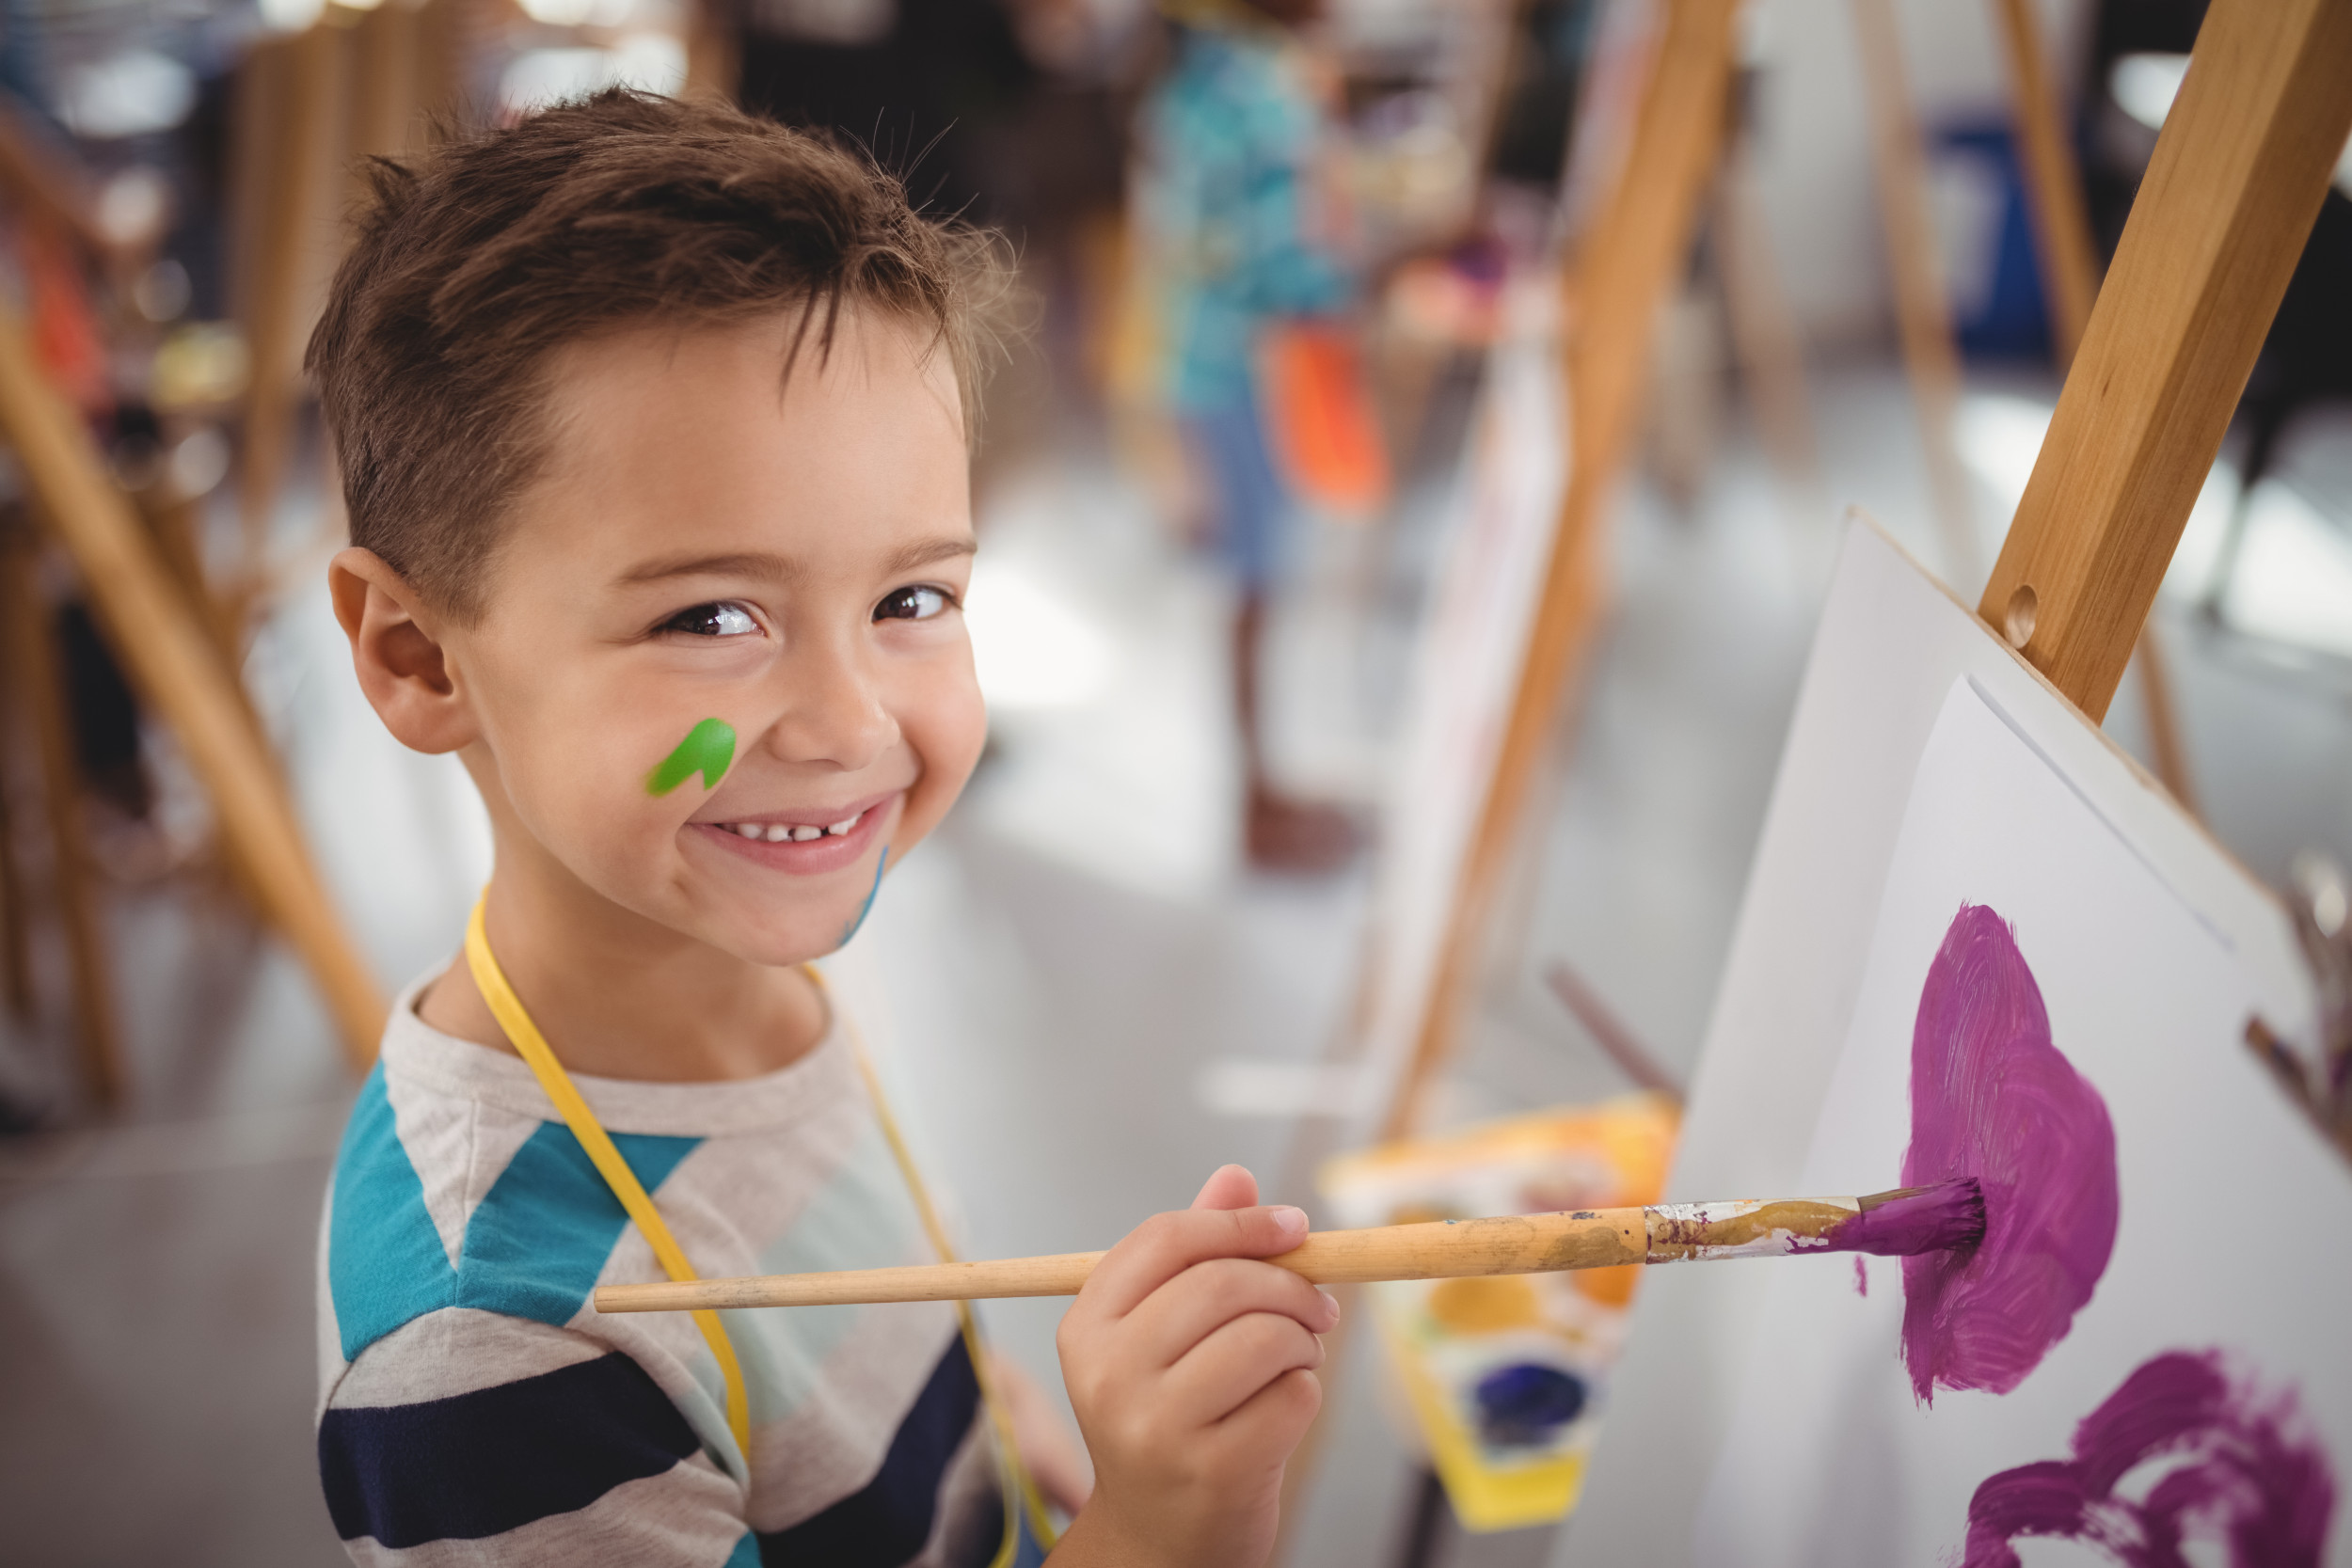 Parent Not Allowing 4-Year-Old to Paint at School Due to 'Mess' Slammed